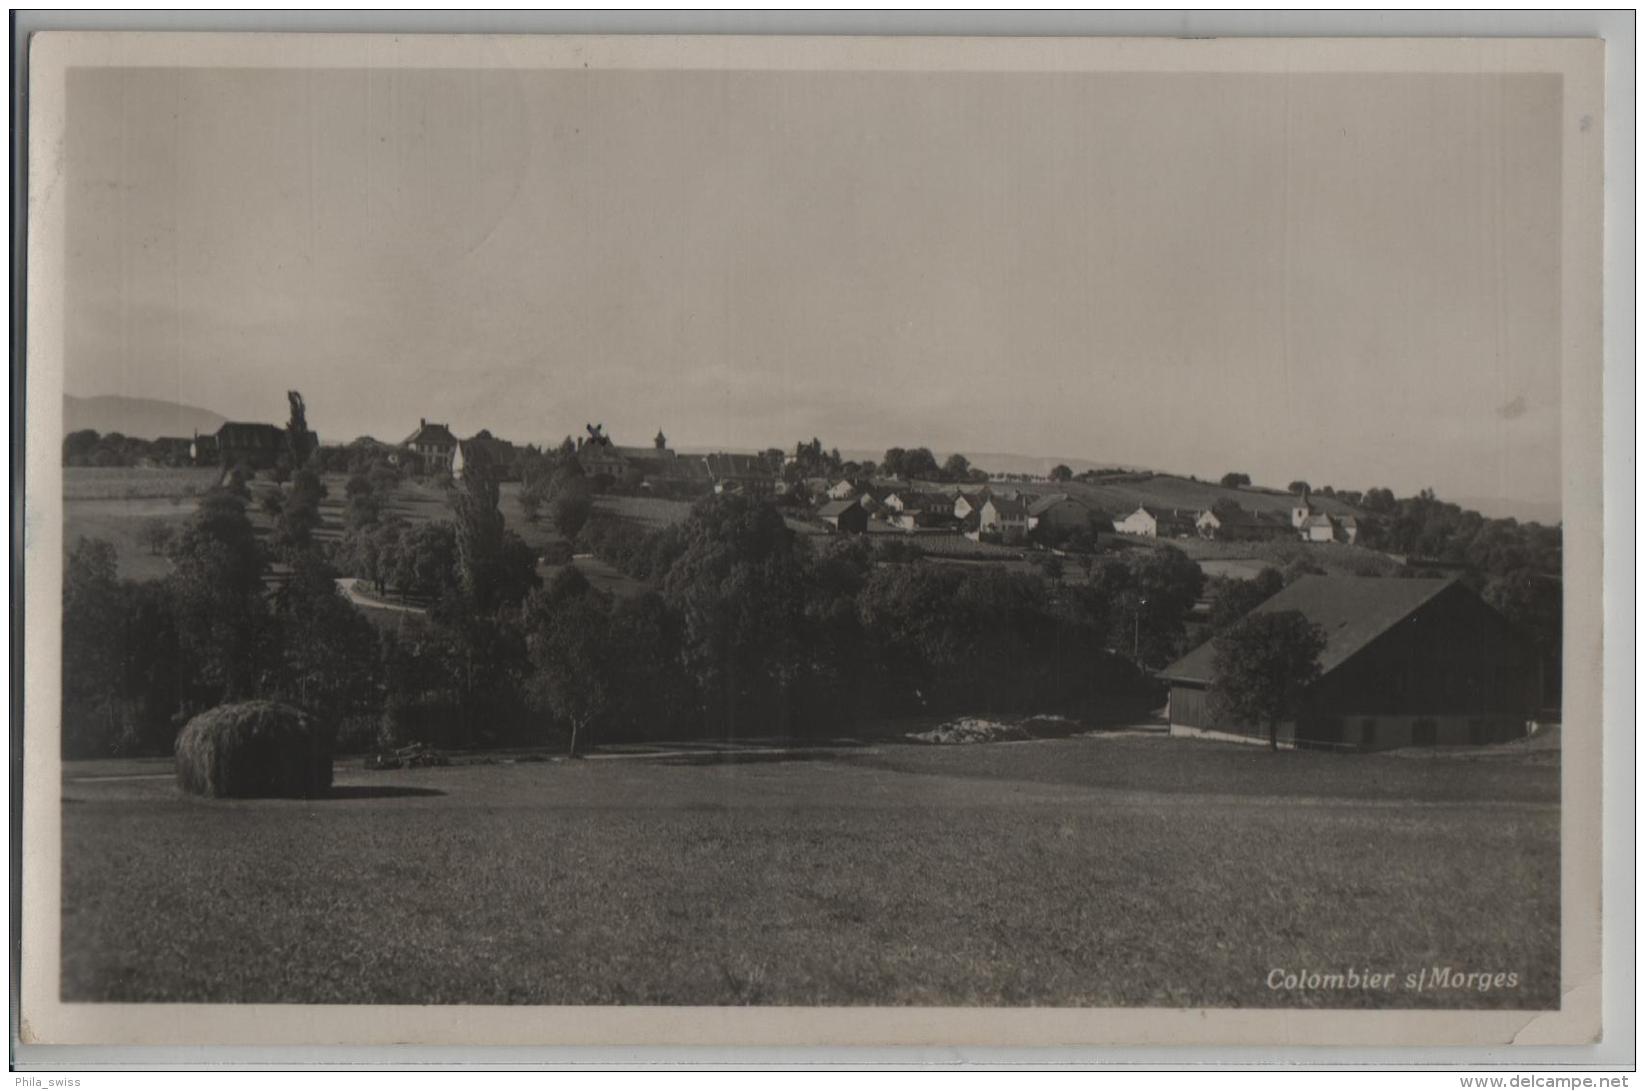 Colombier S/Morges - Photo: Guggenheim No. 13536 - Colombier